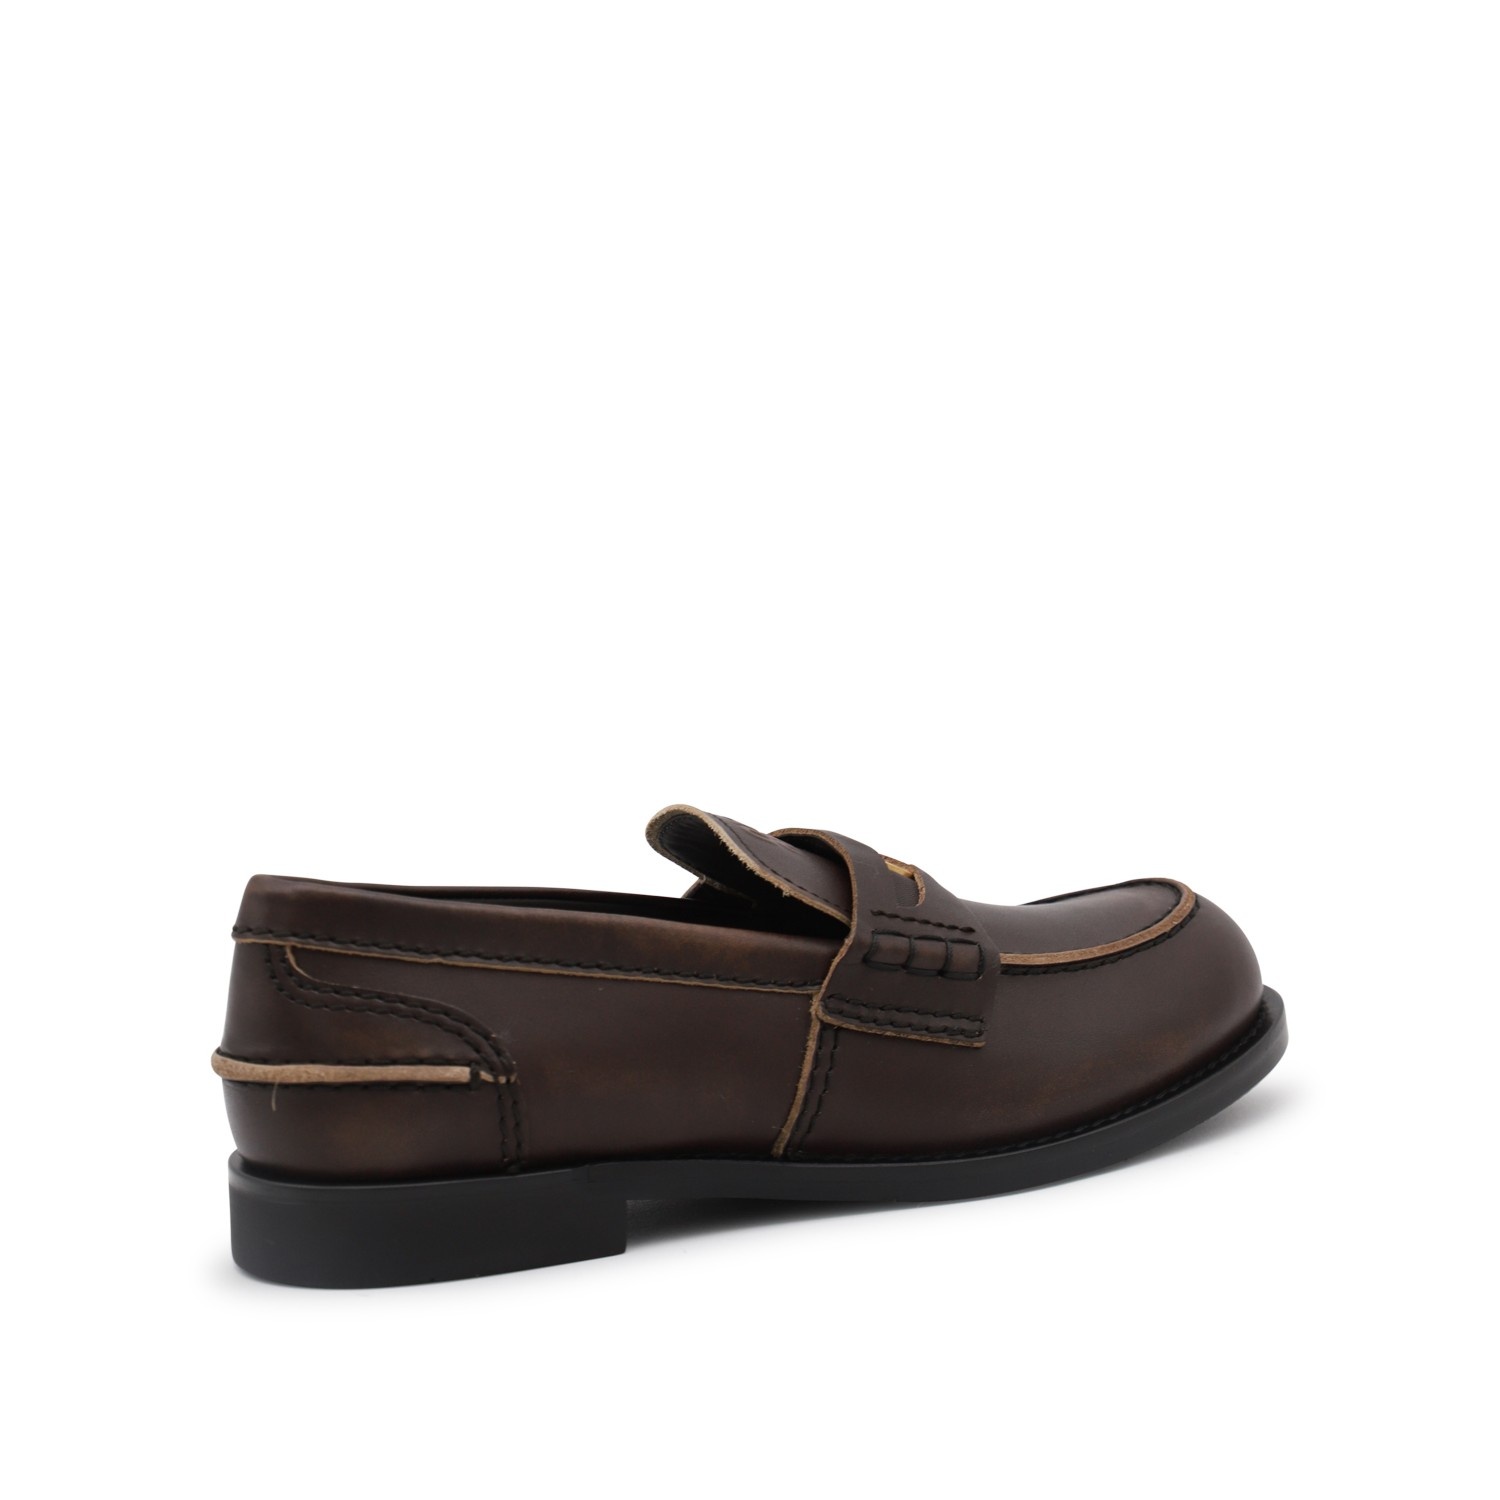 BROWN LEATHER LOAFERS - 4